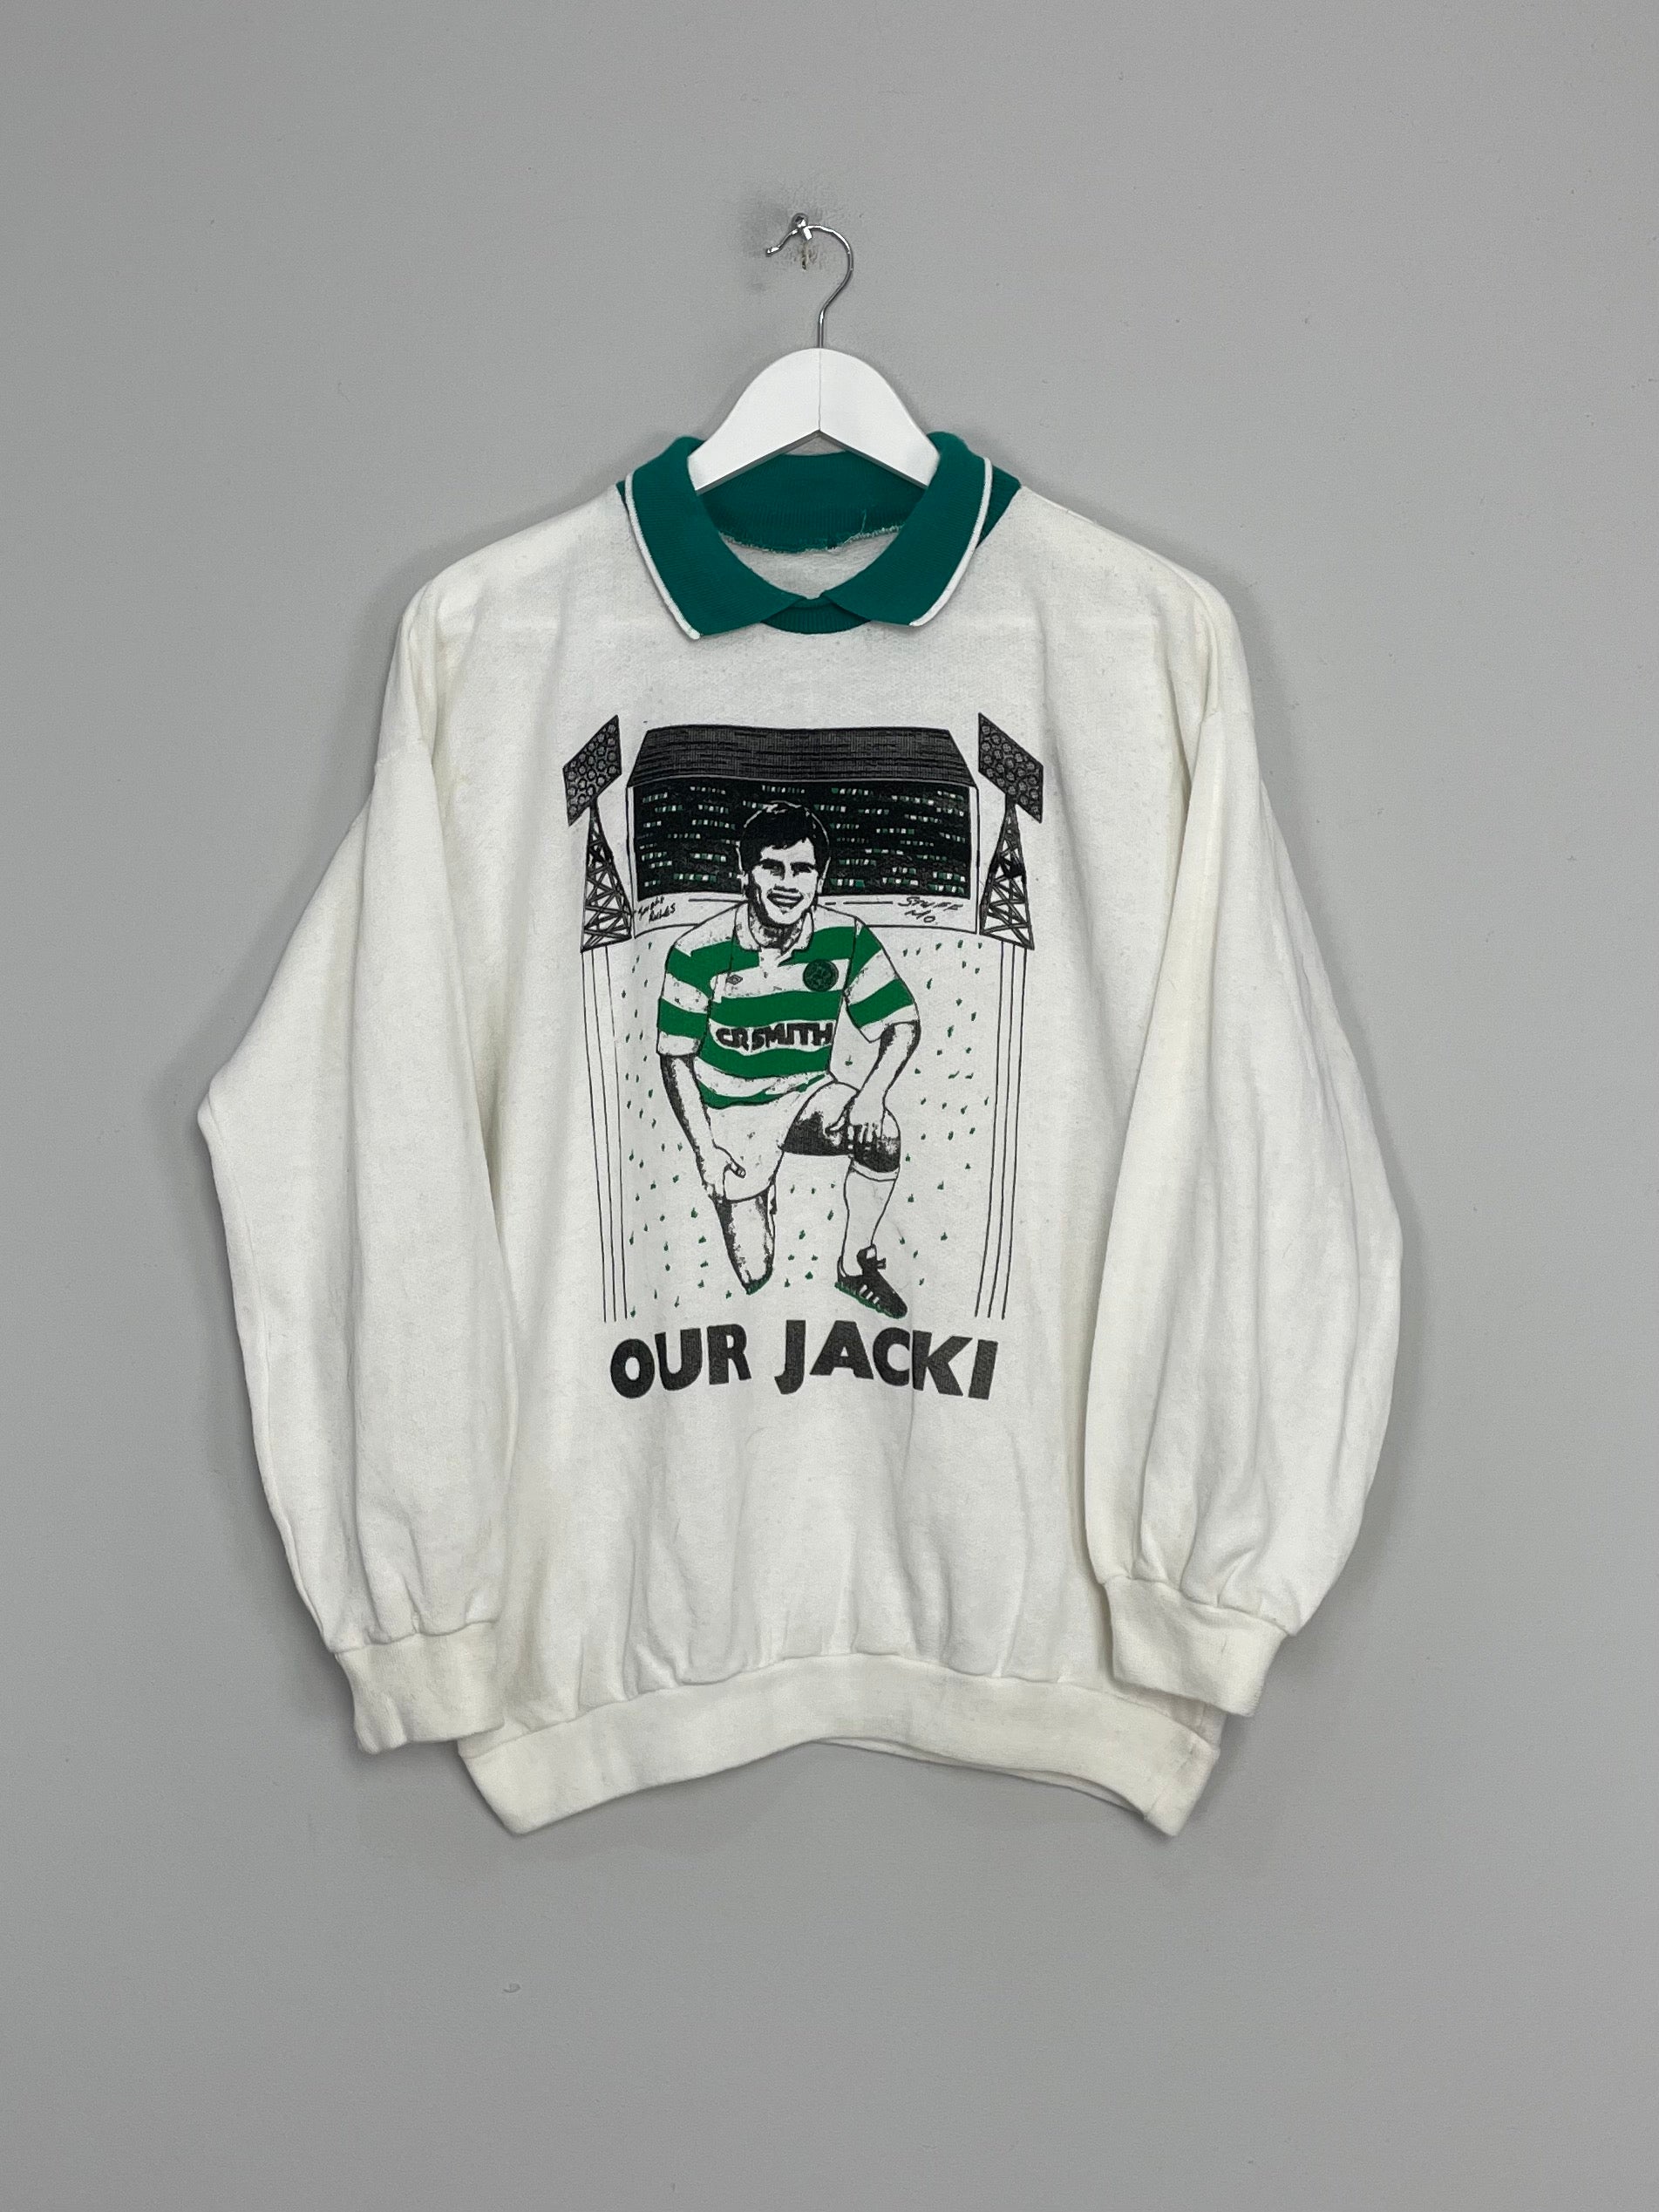 Image of the Celtic jumper from the 1993/95 season